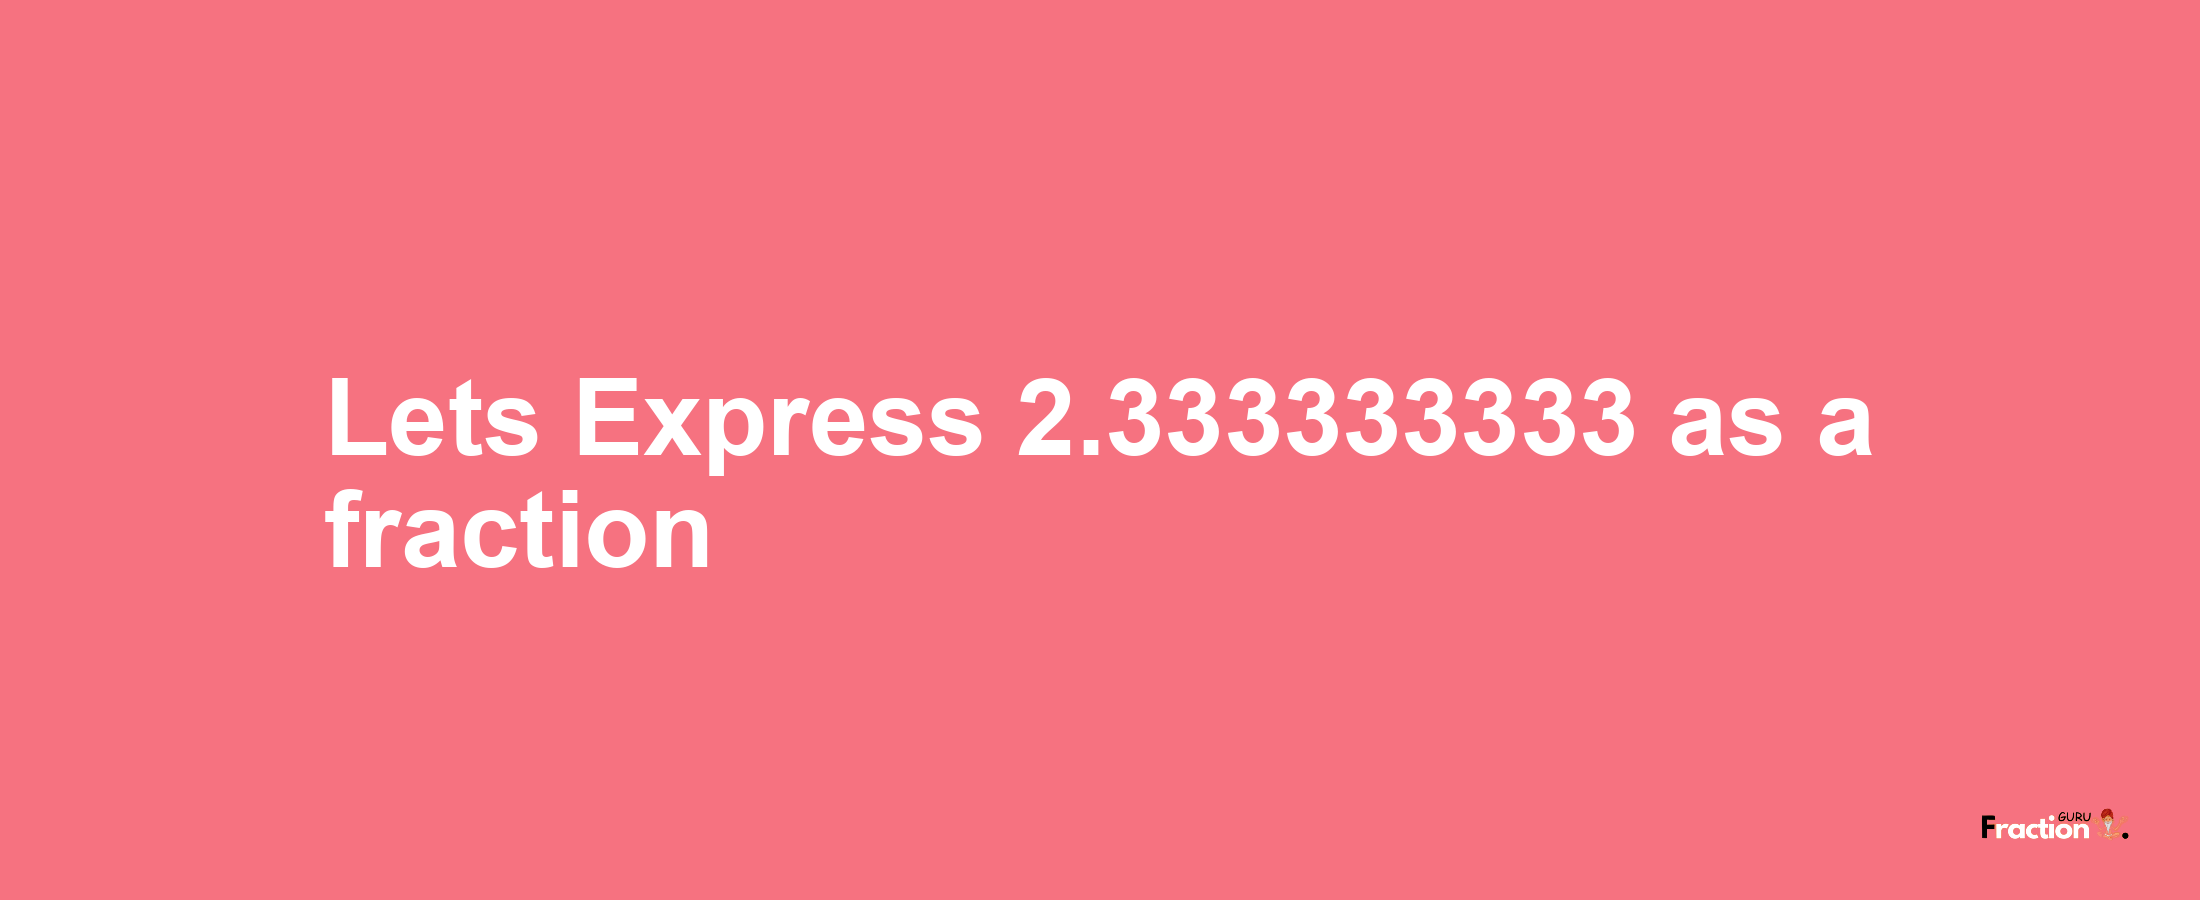 Lets Express 2.333333333 as afraction